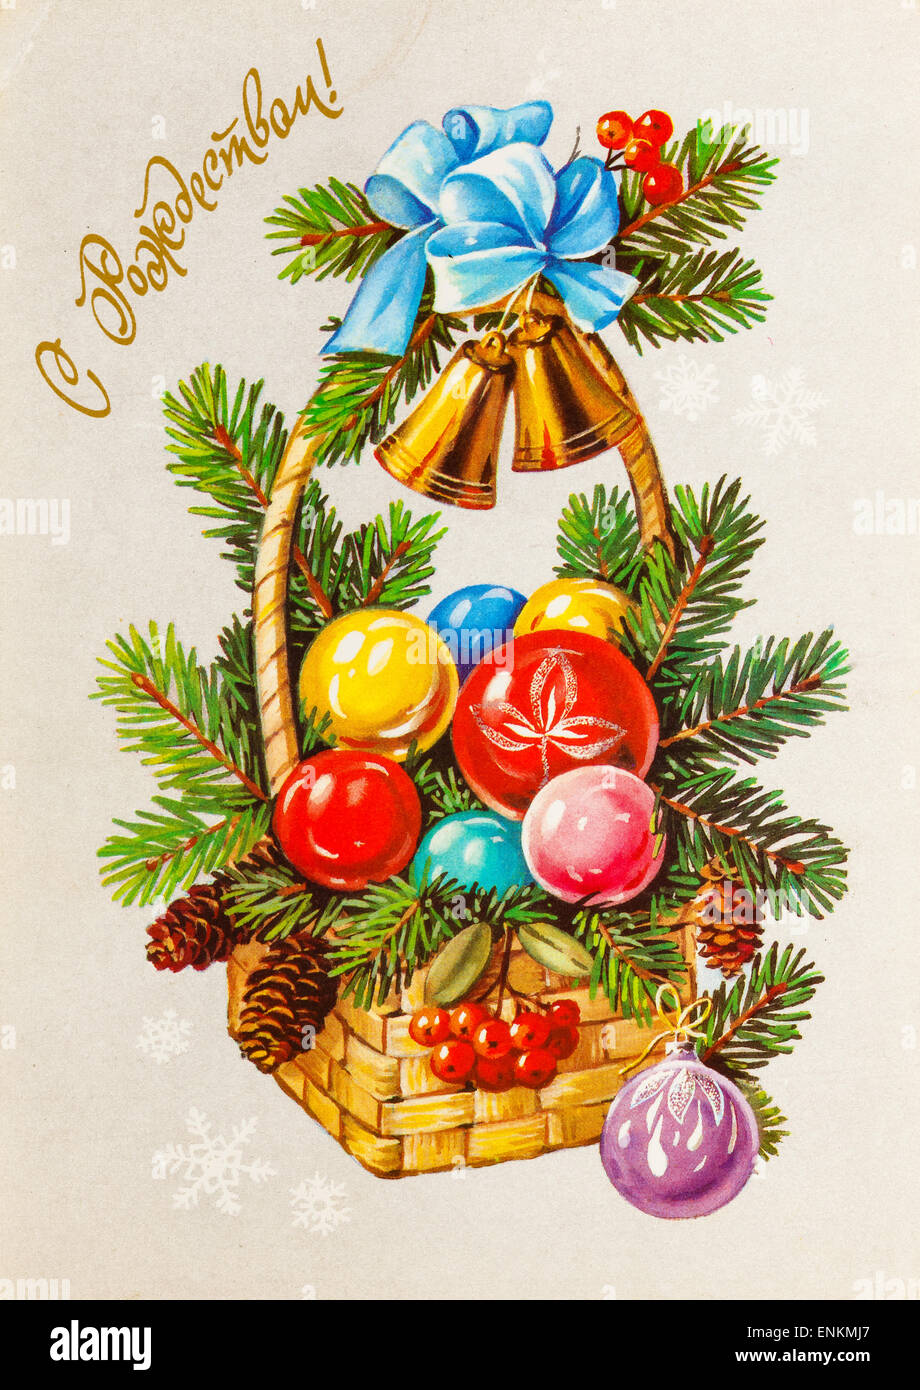 USSR - CIRCA 1991: Reproduction of antique postcard shows Basket with New Year's attributes - spruce branches, glass balls, rowa Stock Photo